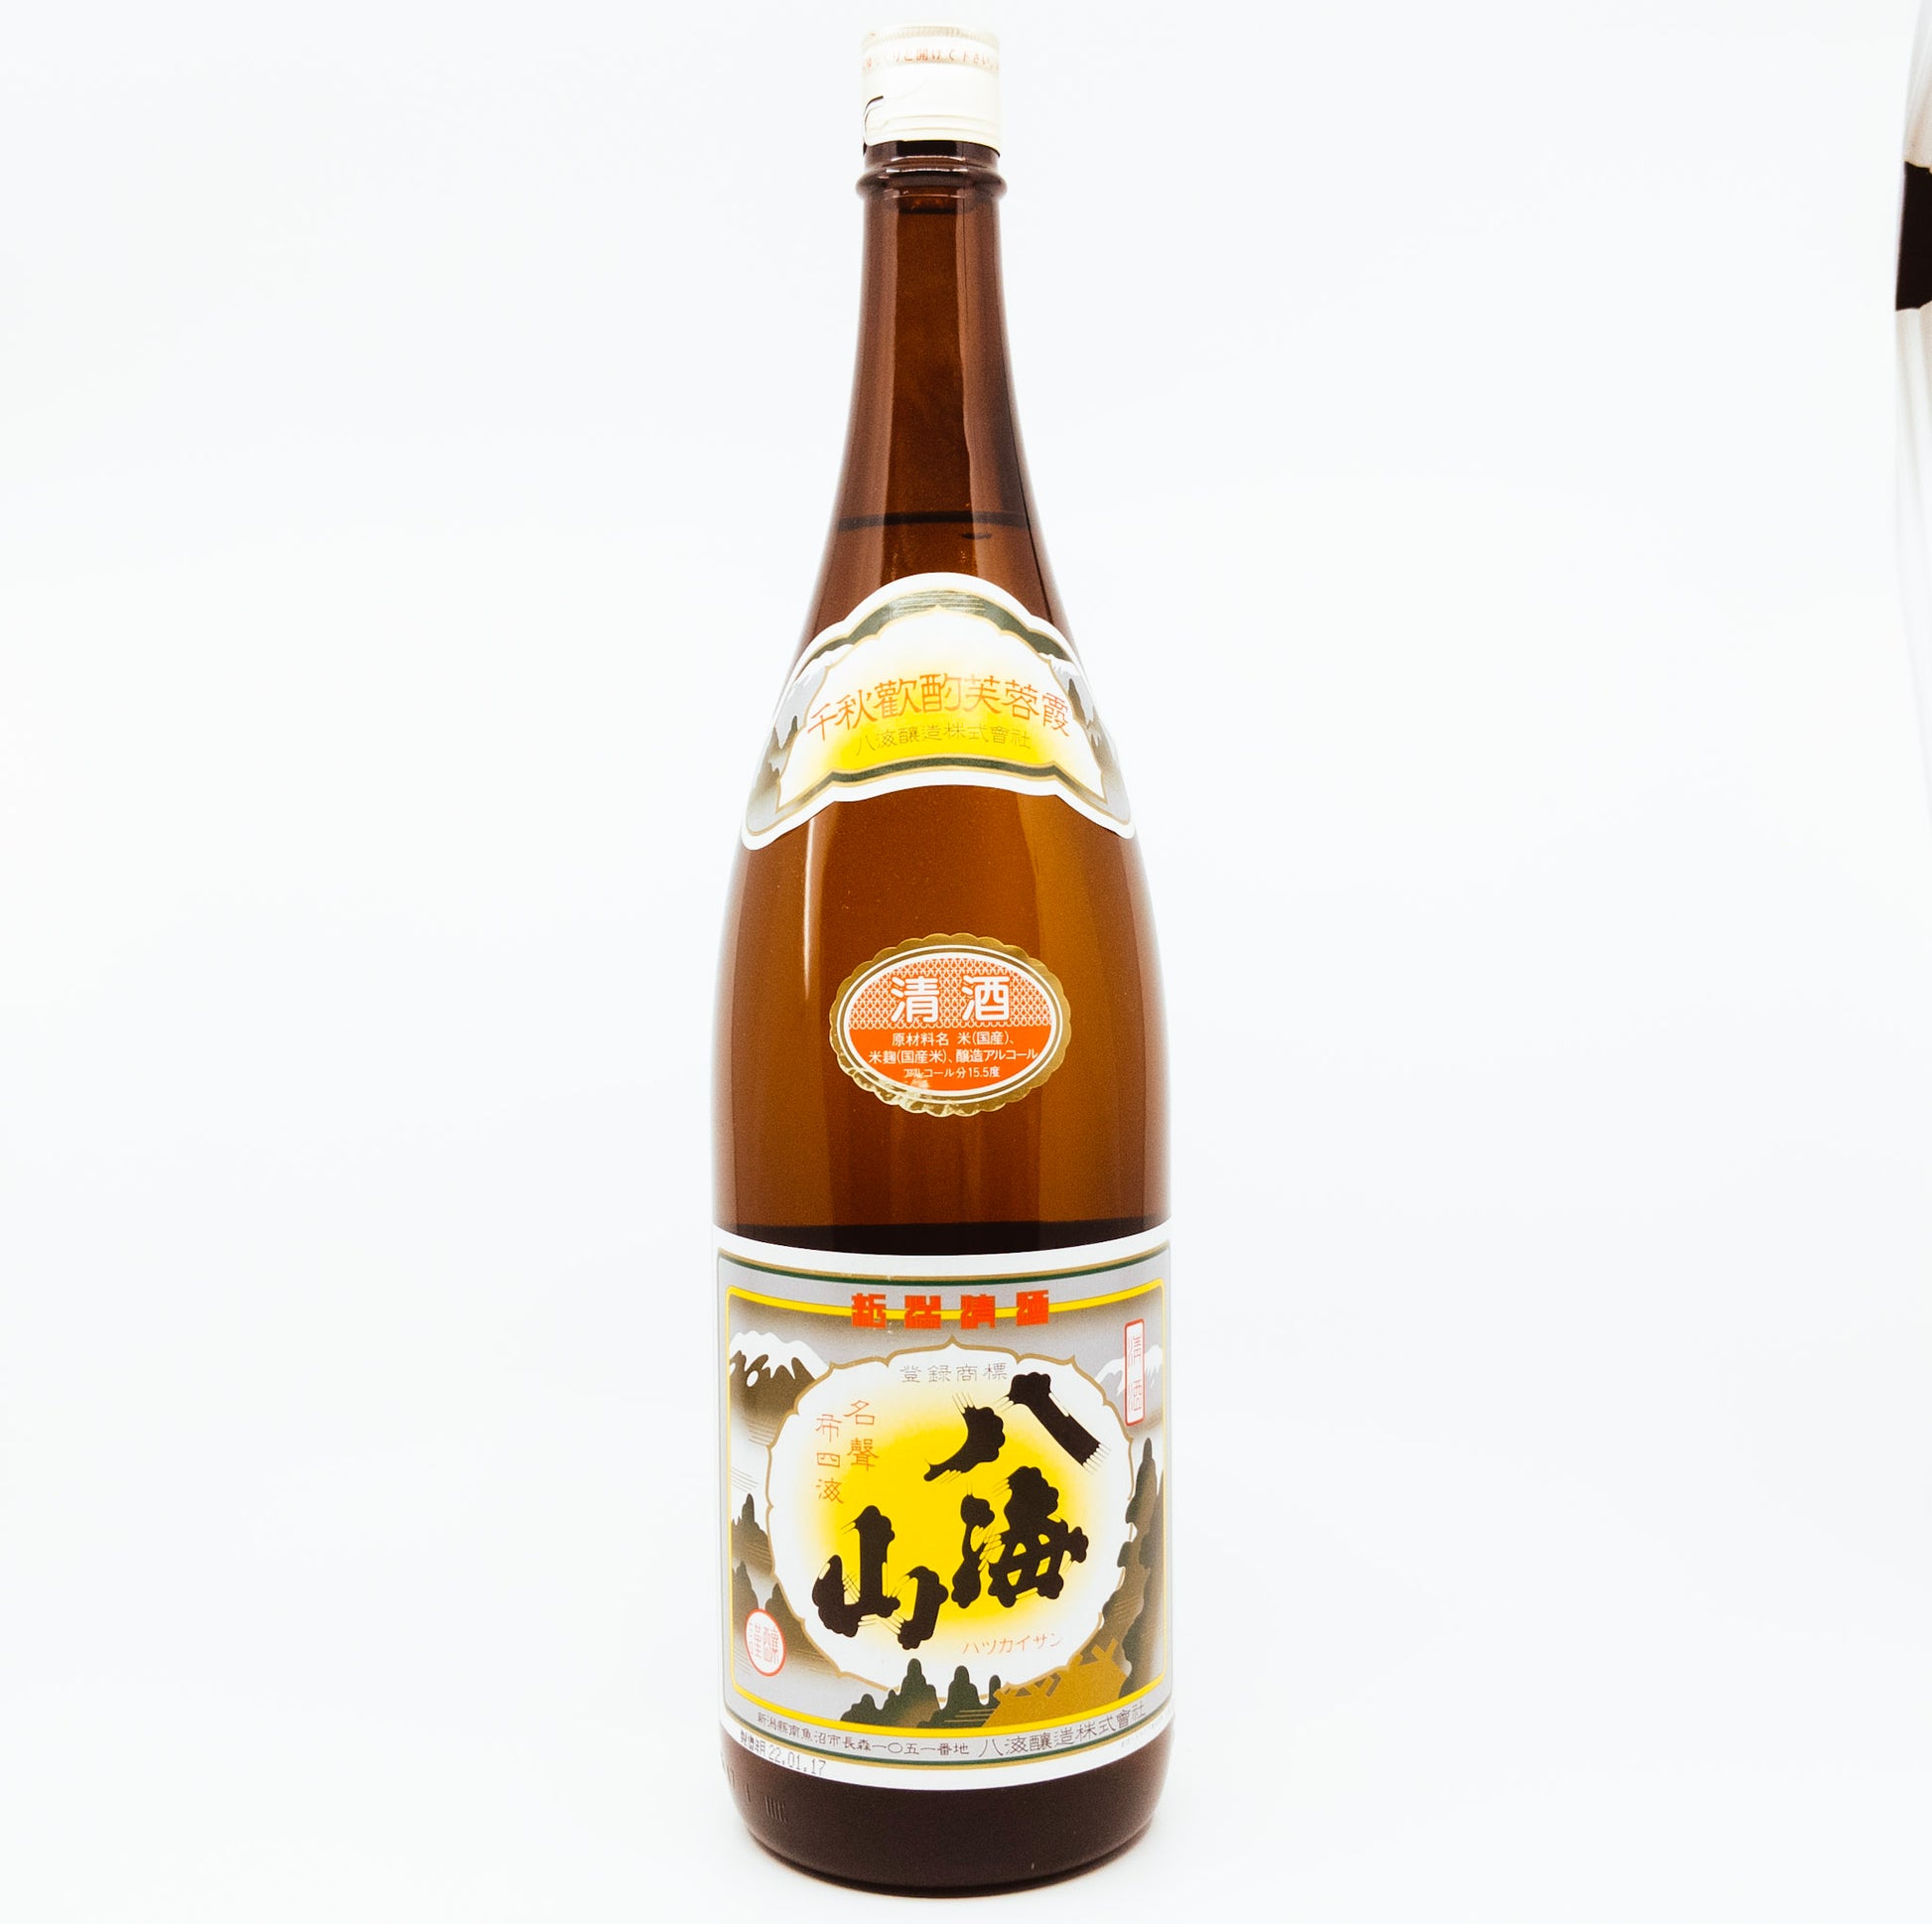 brown bottle with yellow sun on label